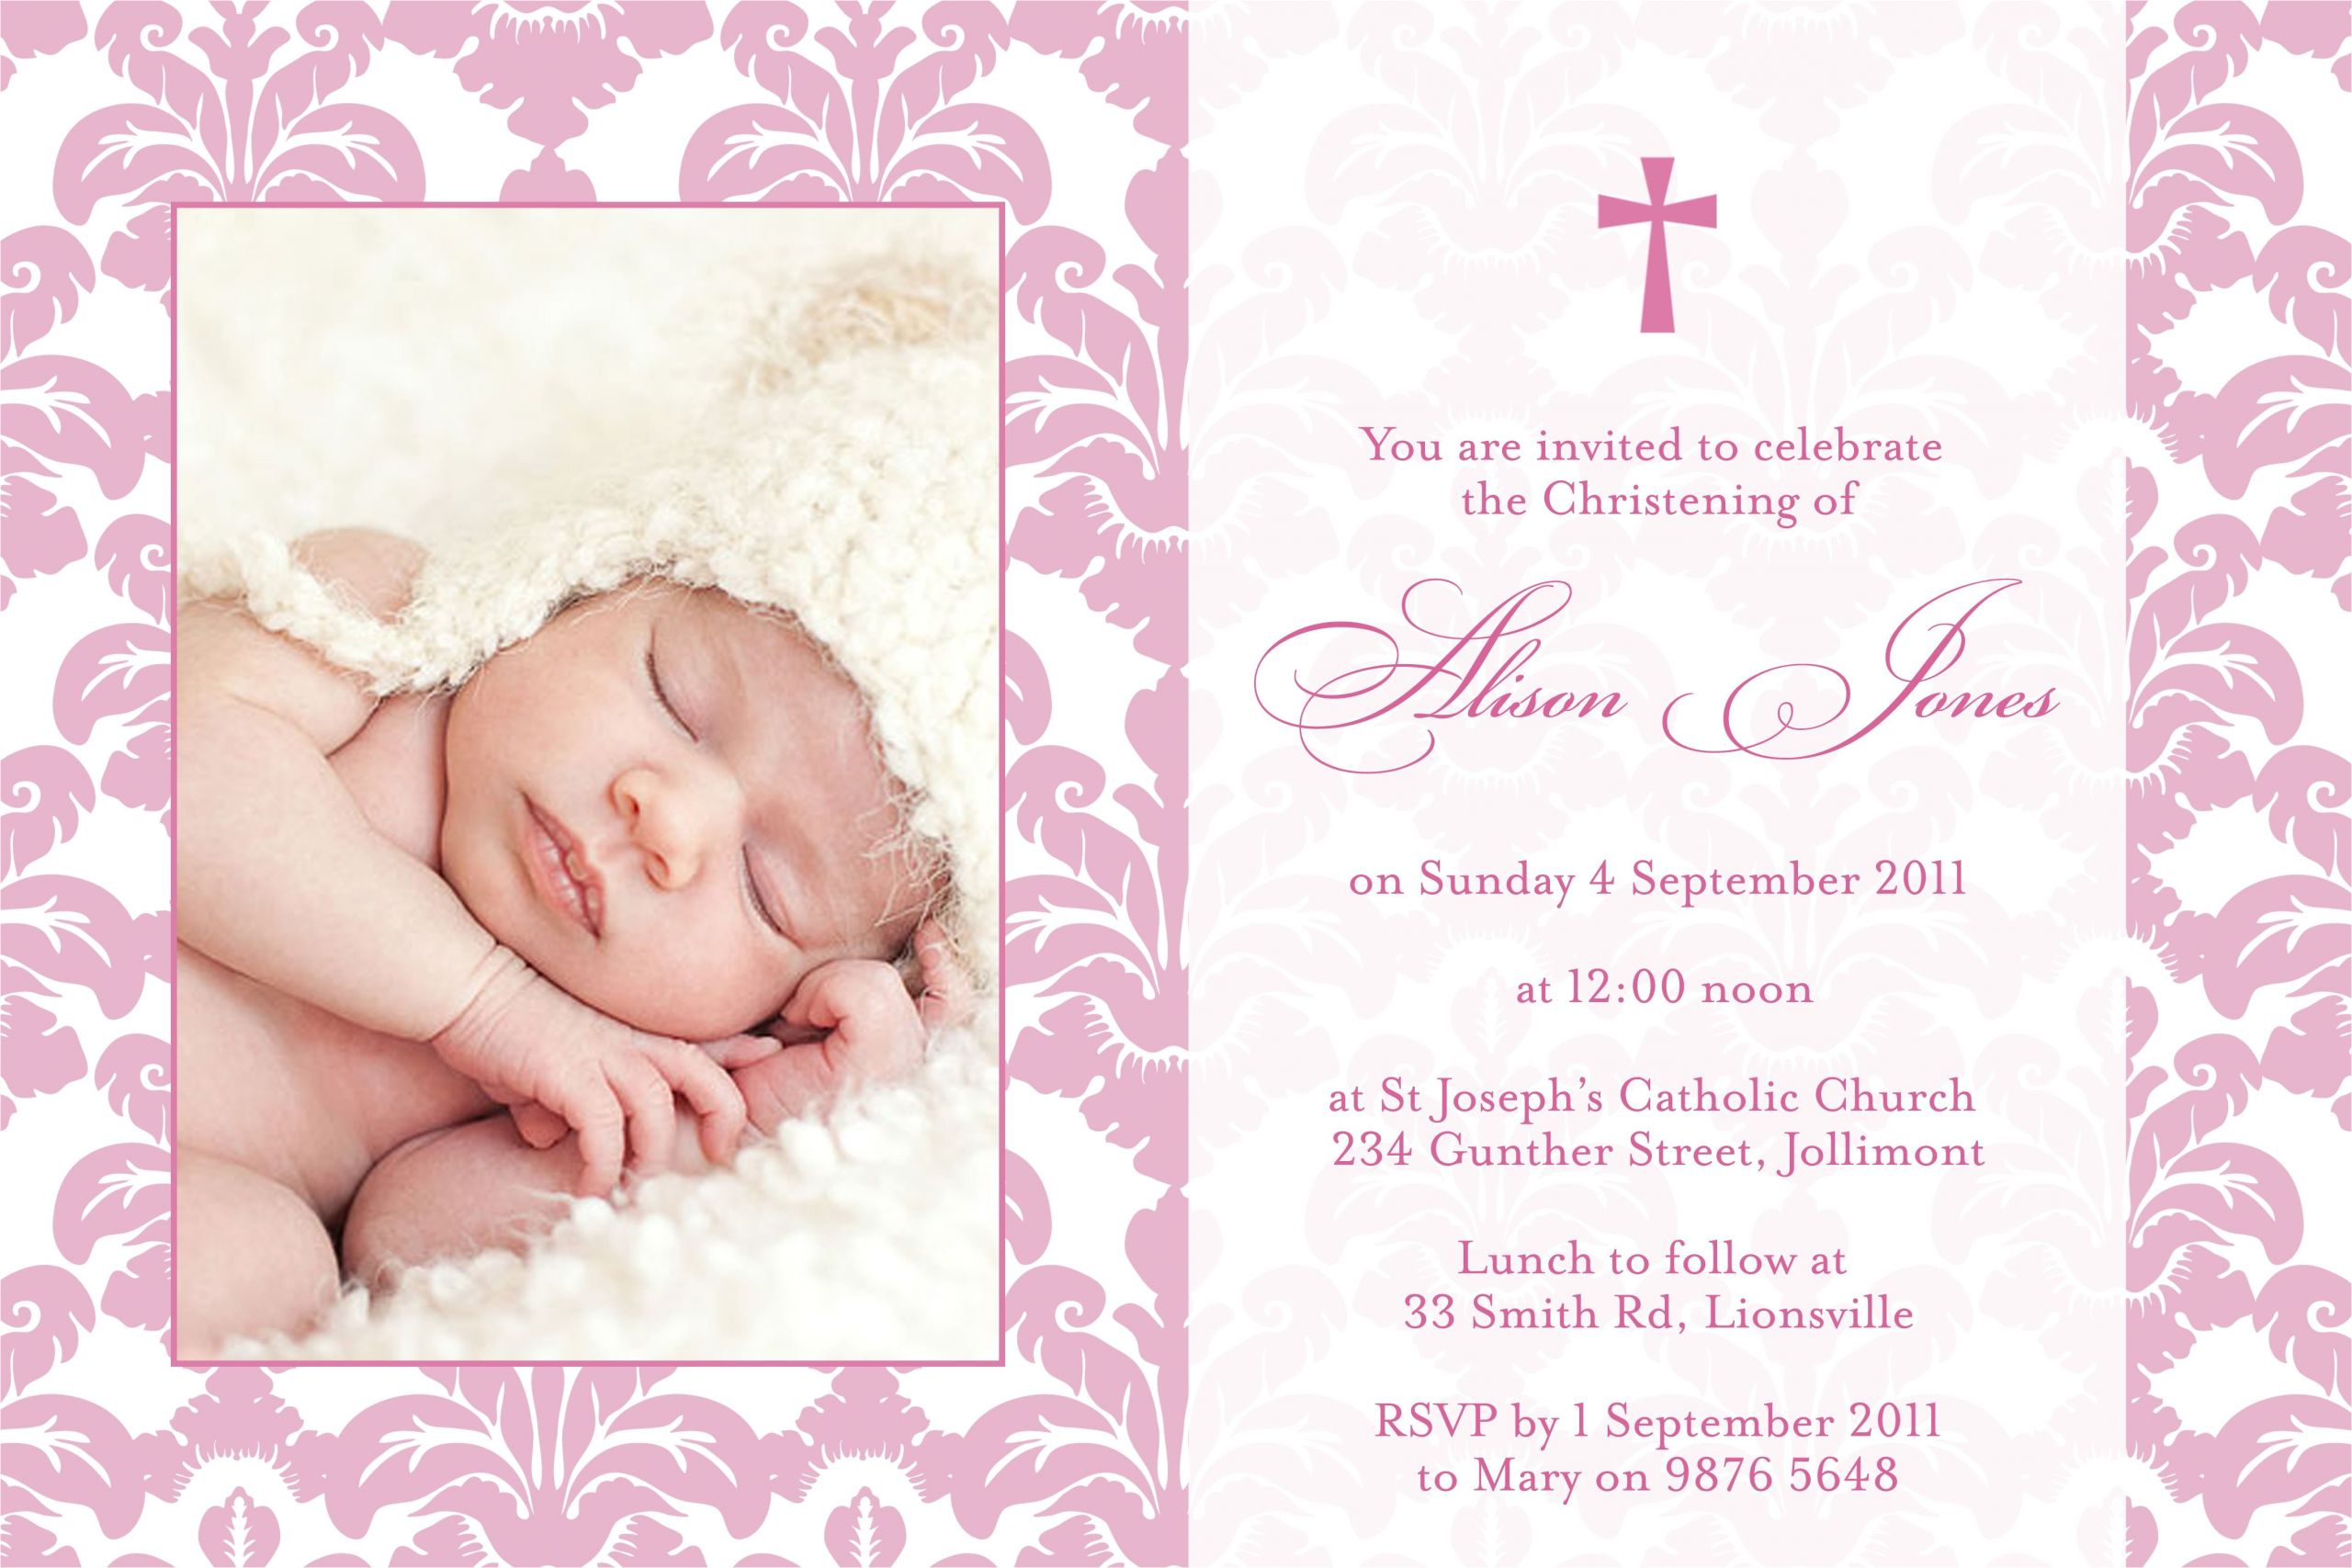 Invitation Card Christening Baby Girl Baptism Invitation Sample Wording with Images Baby